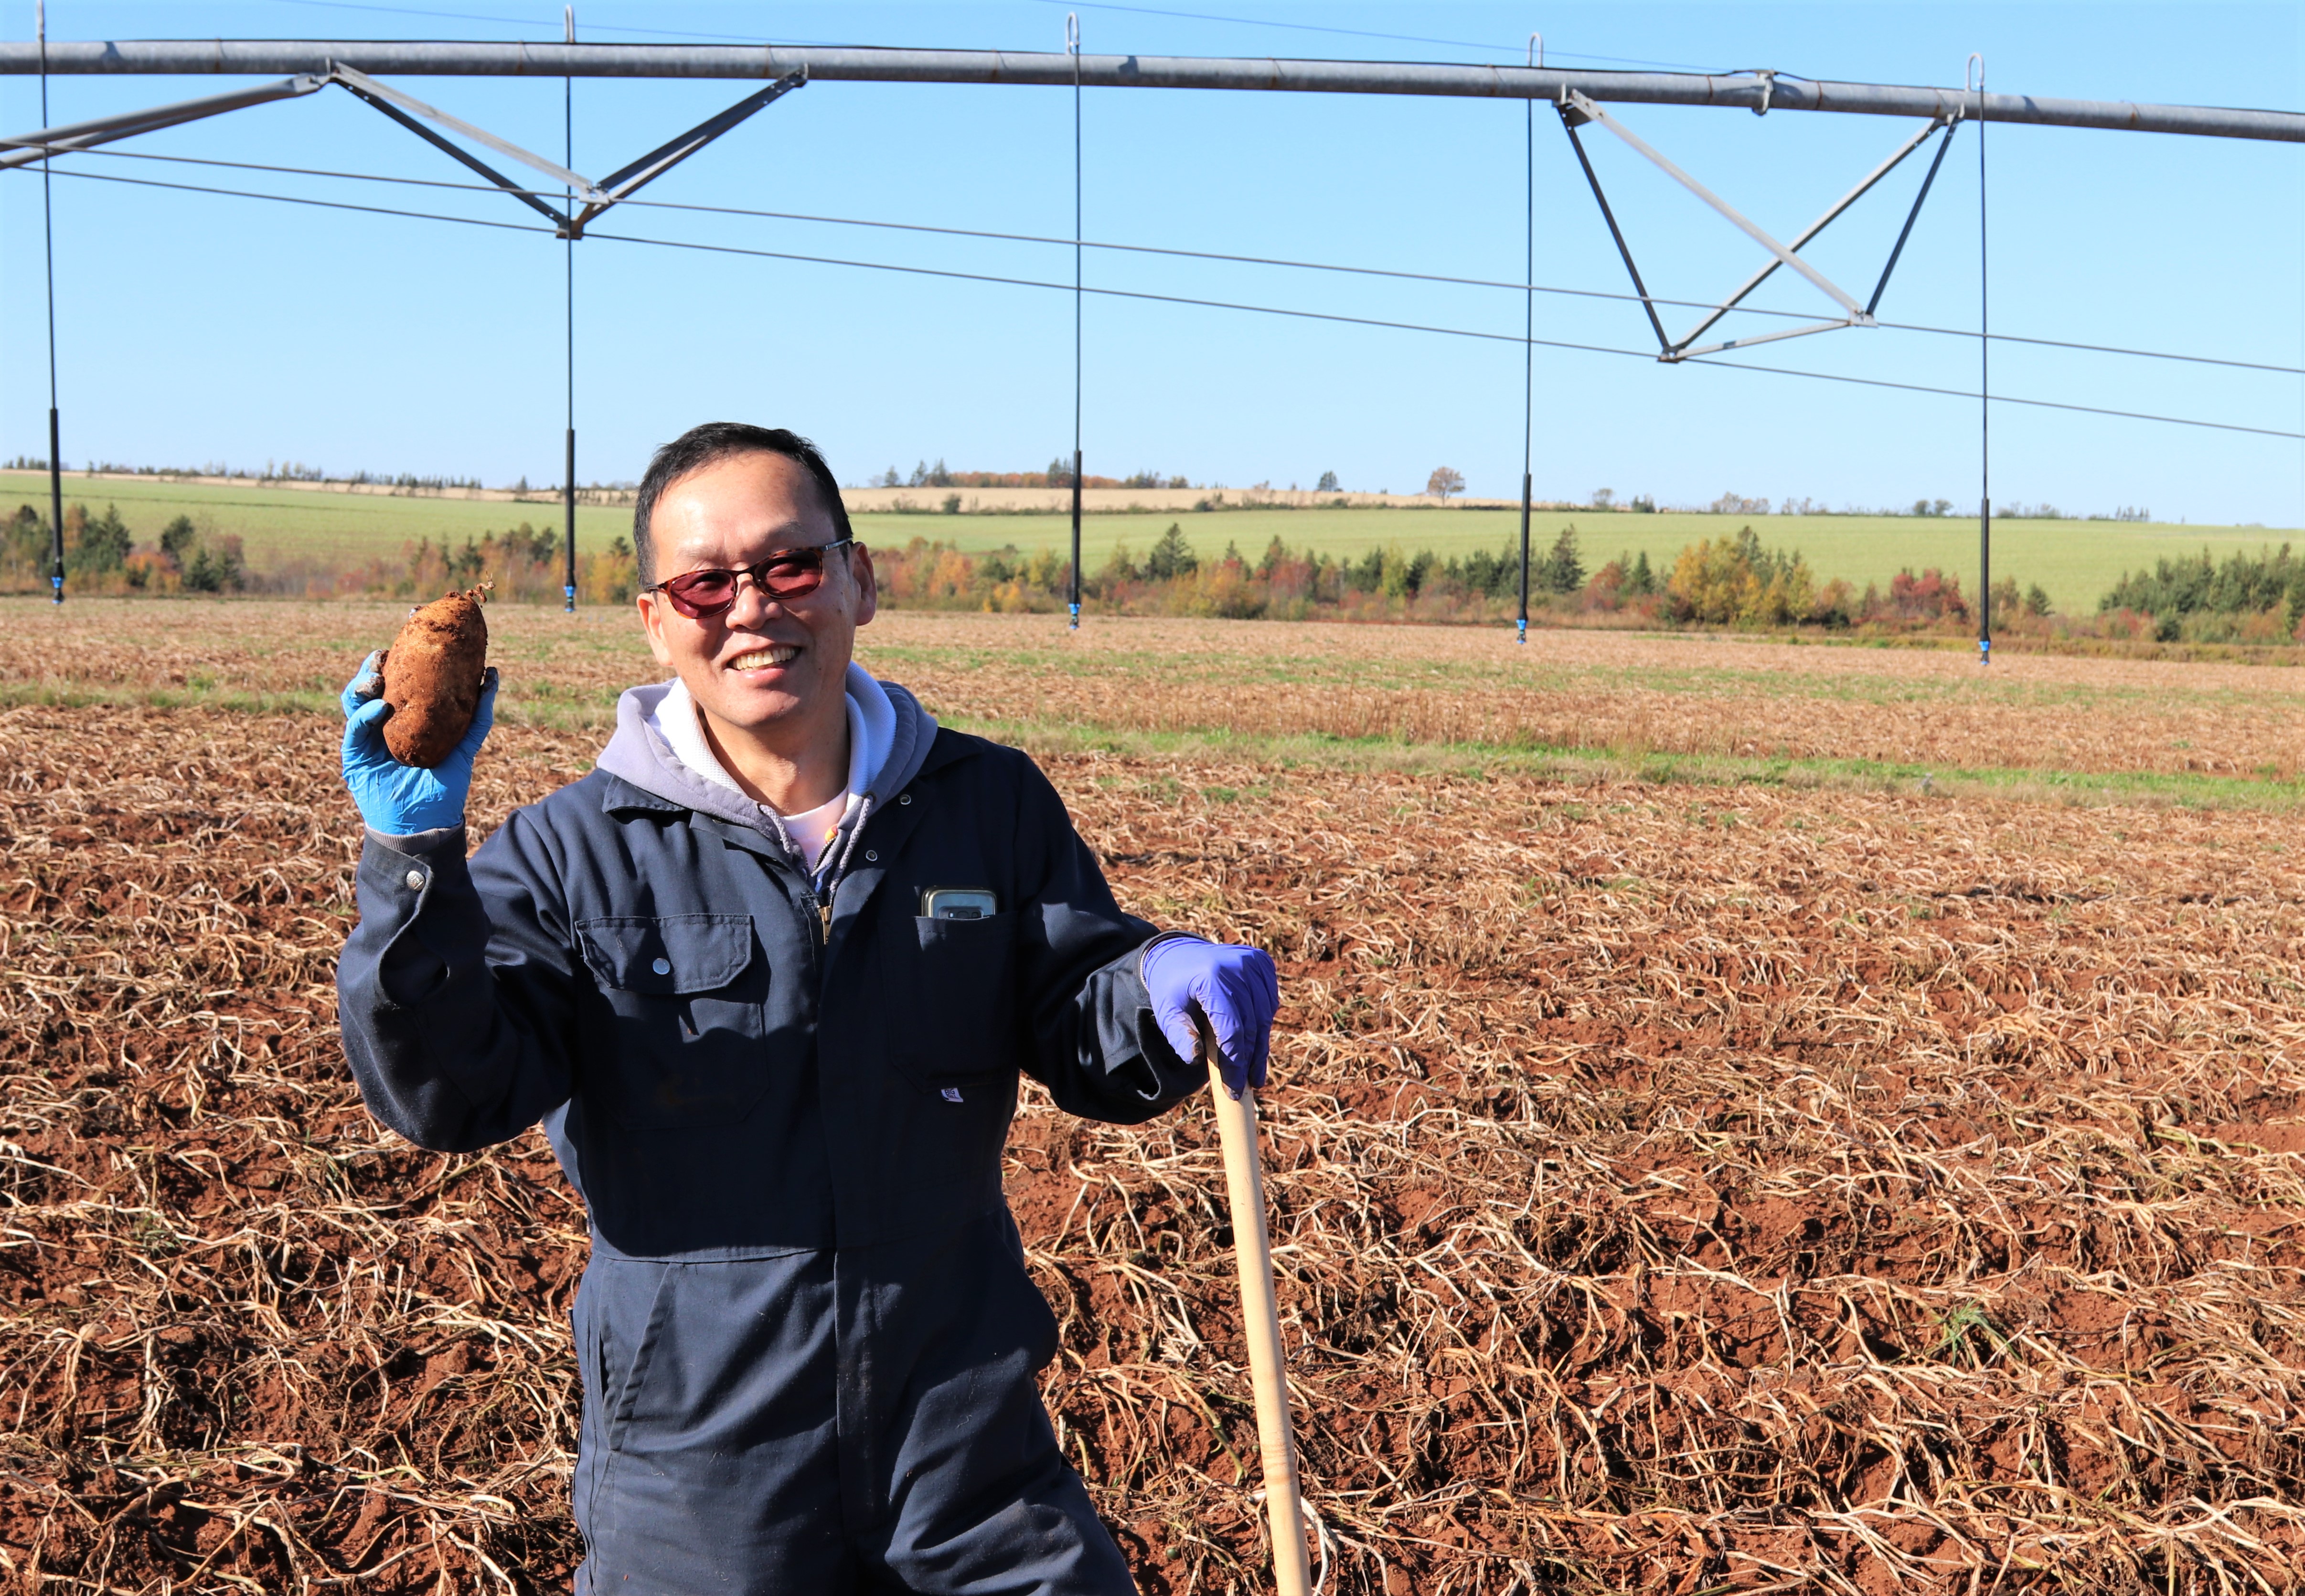 A scientist holding a recently dug potato in a farmer’s field.